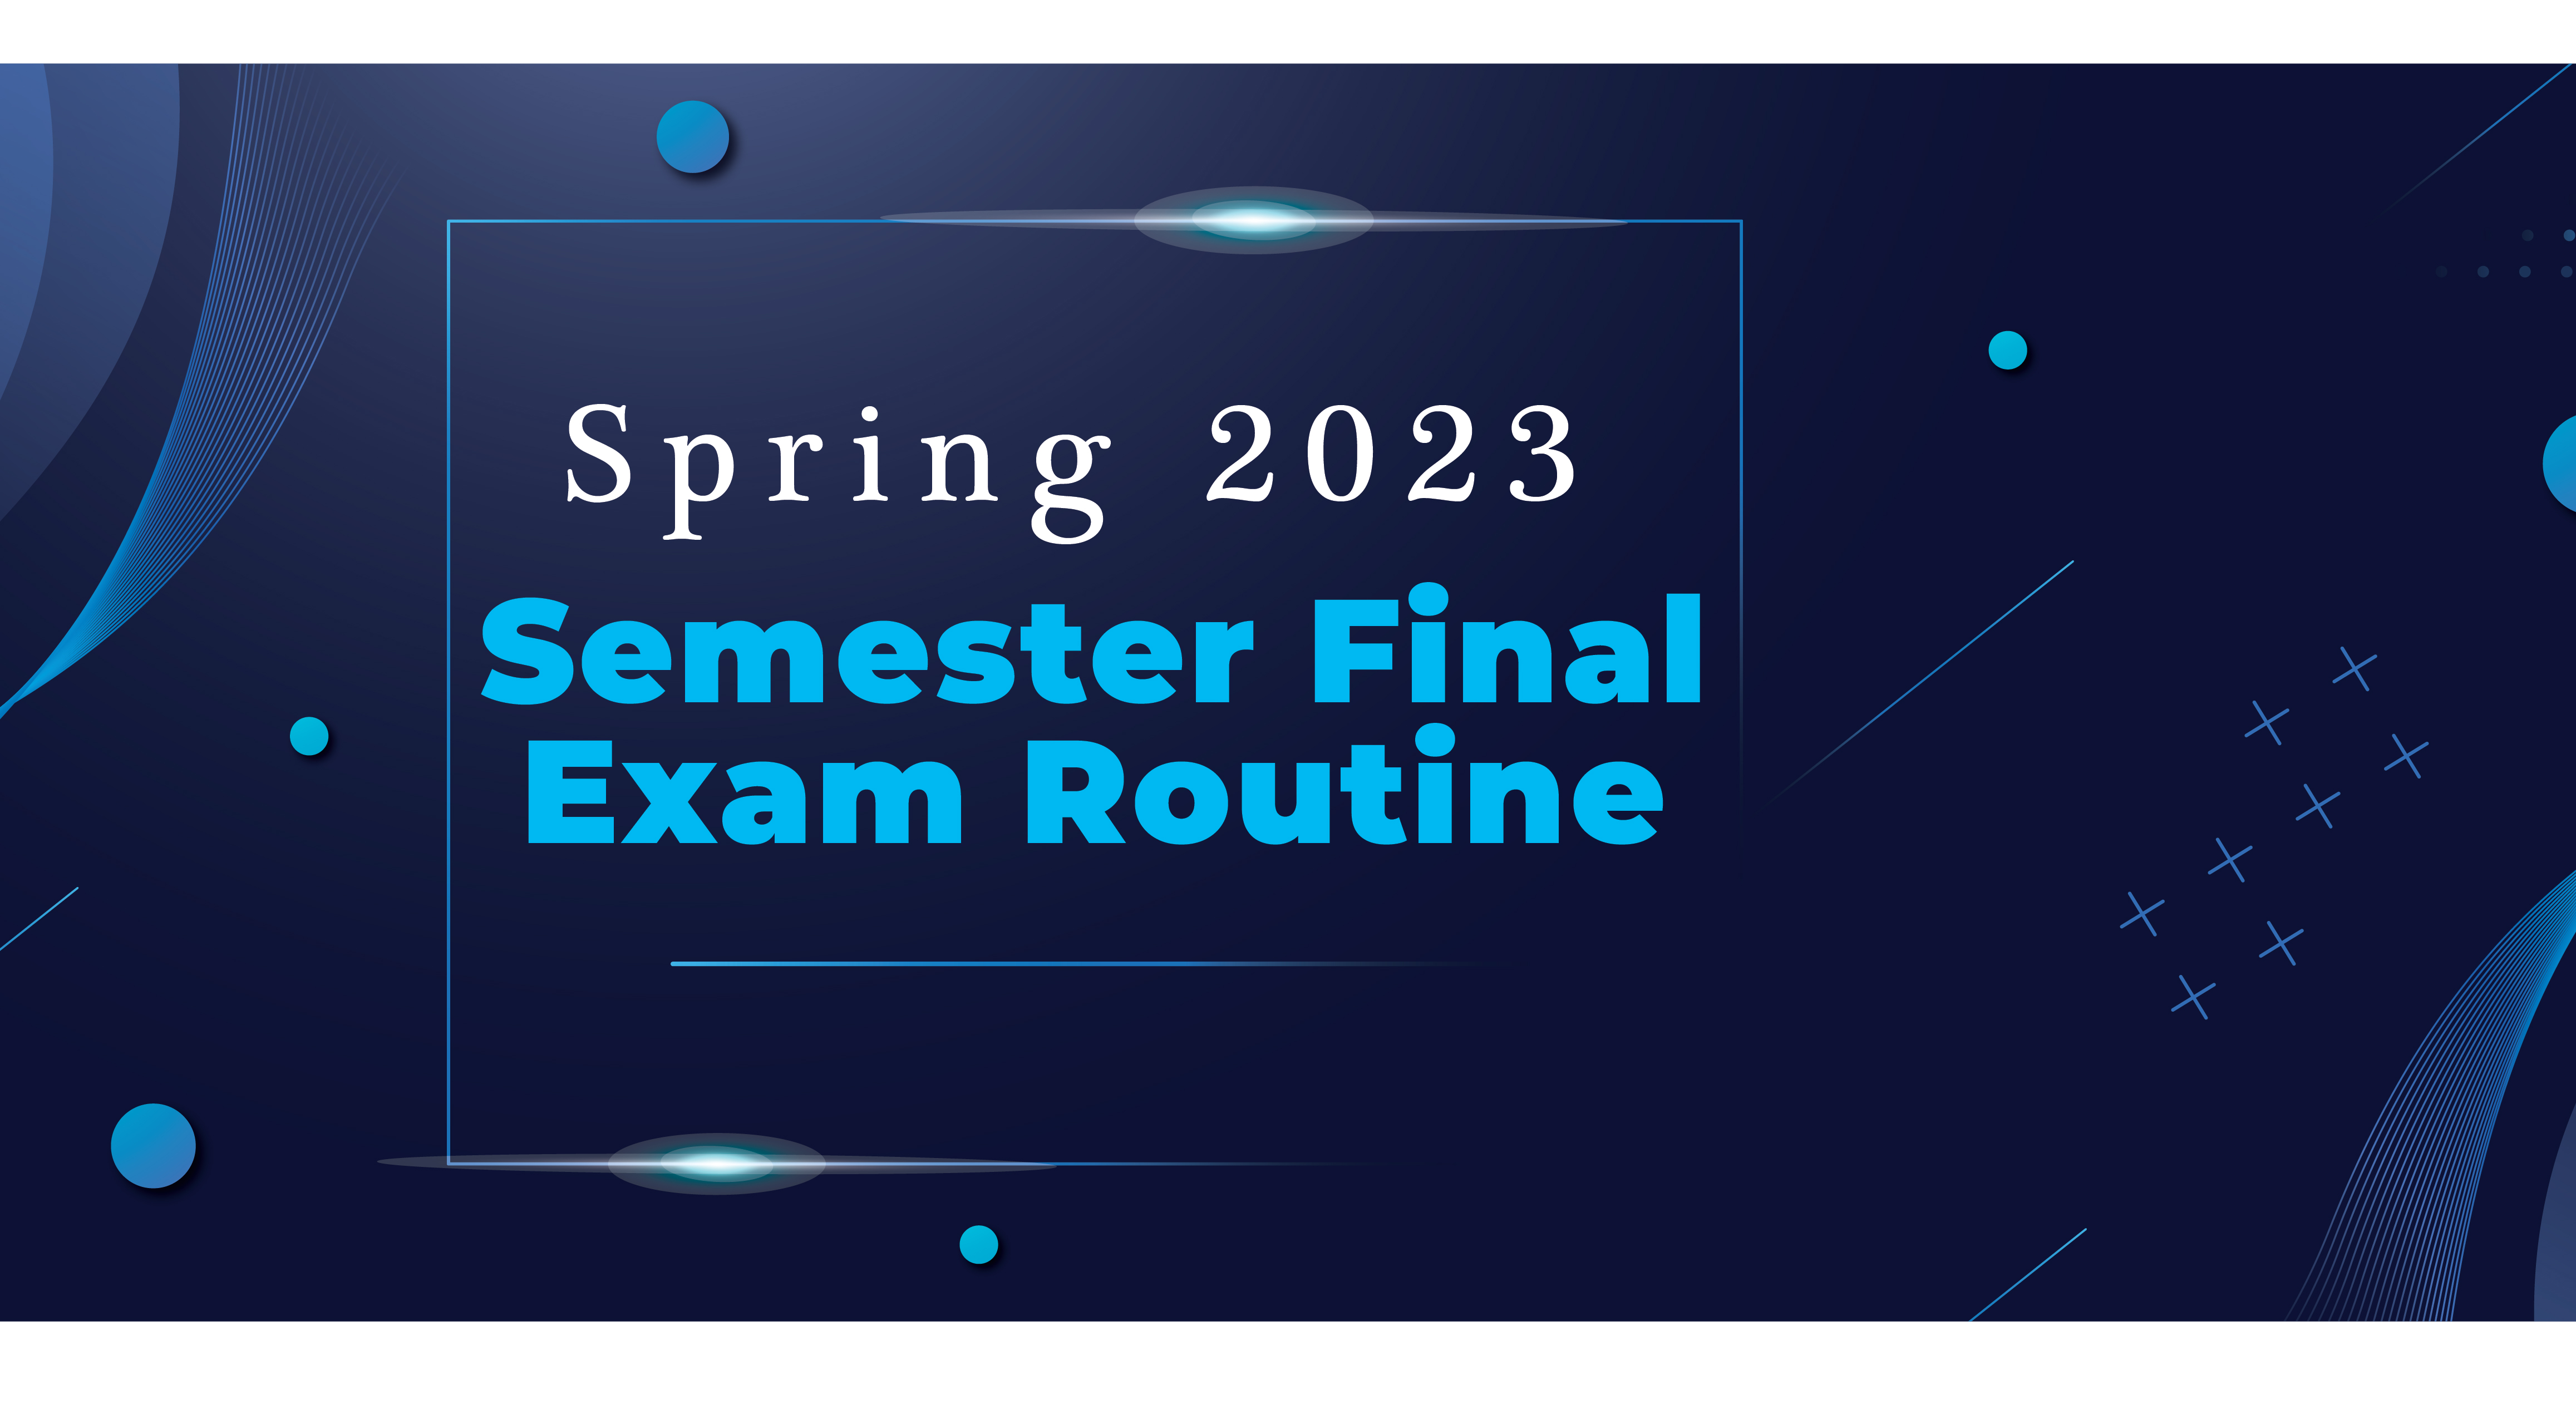 SPRING 2023 SEMESTER FINAL EXAM ROUTINE FOR SOCIOLOGY & ANTHROPOLOGY